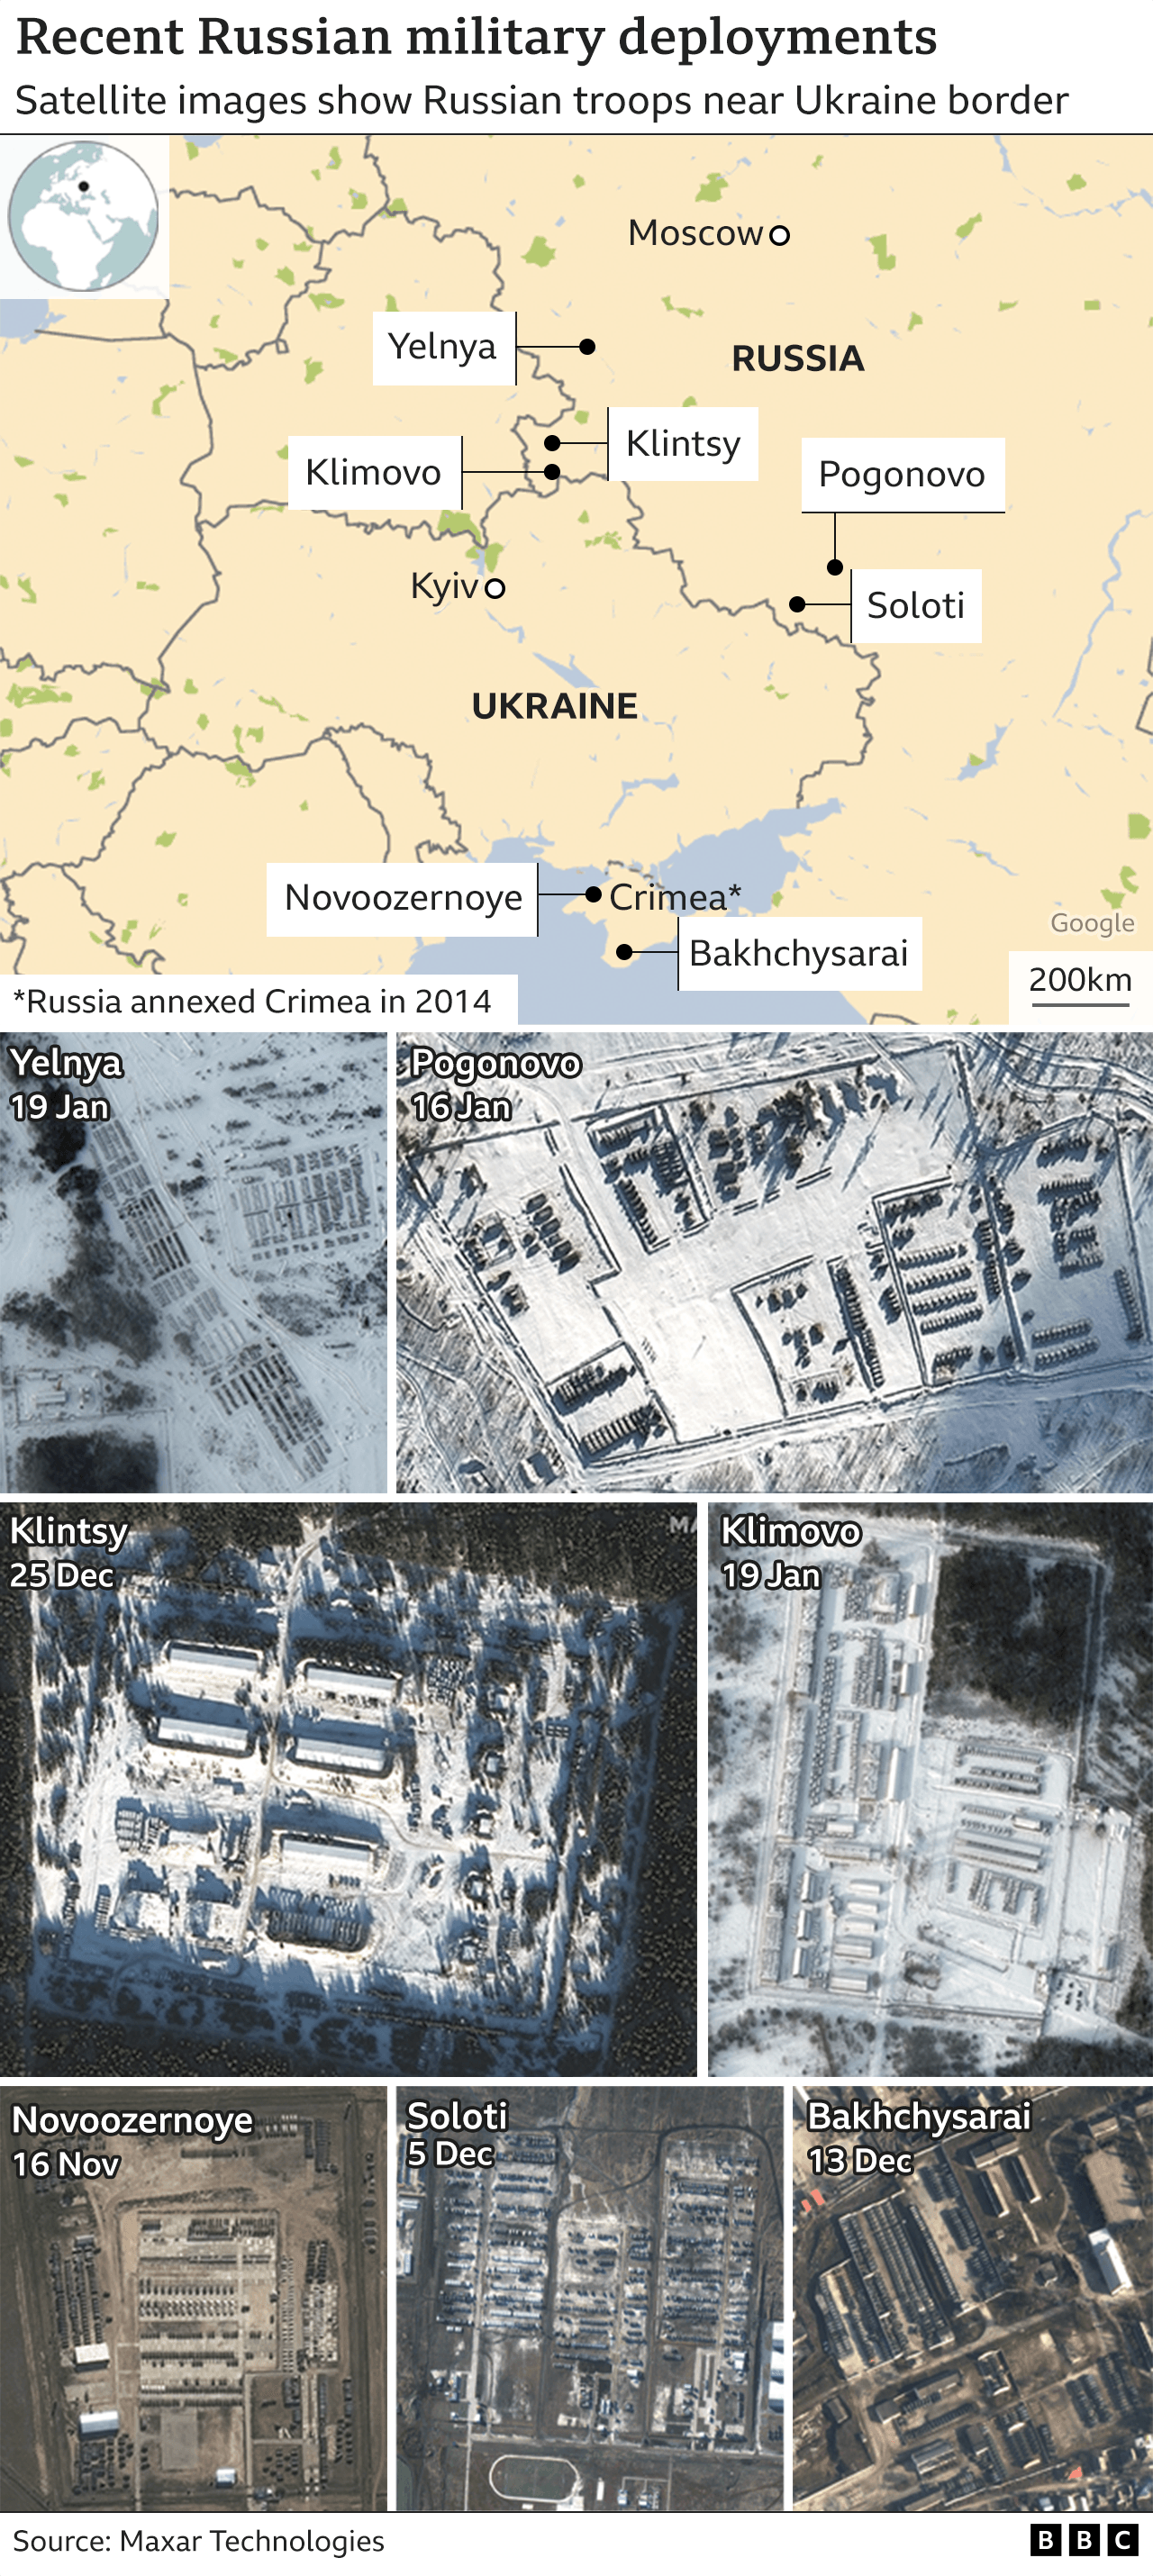 Map of Russia and Ukraine with satellite images showing recent Russian military deployments near the border